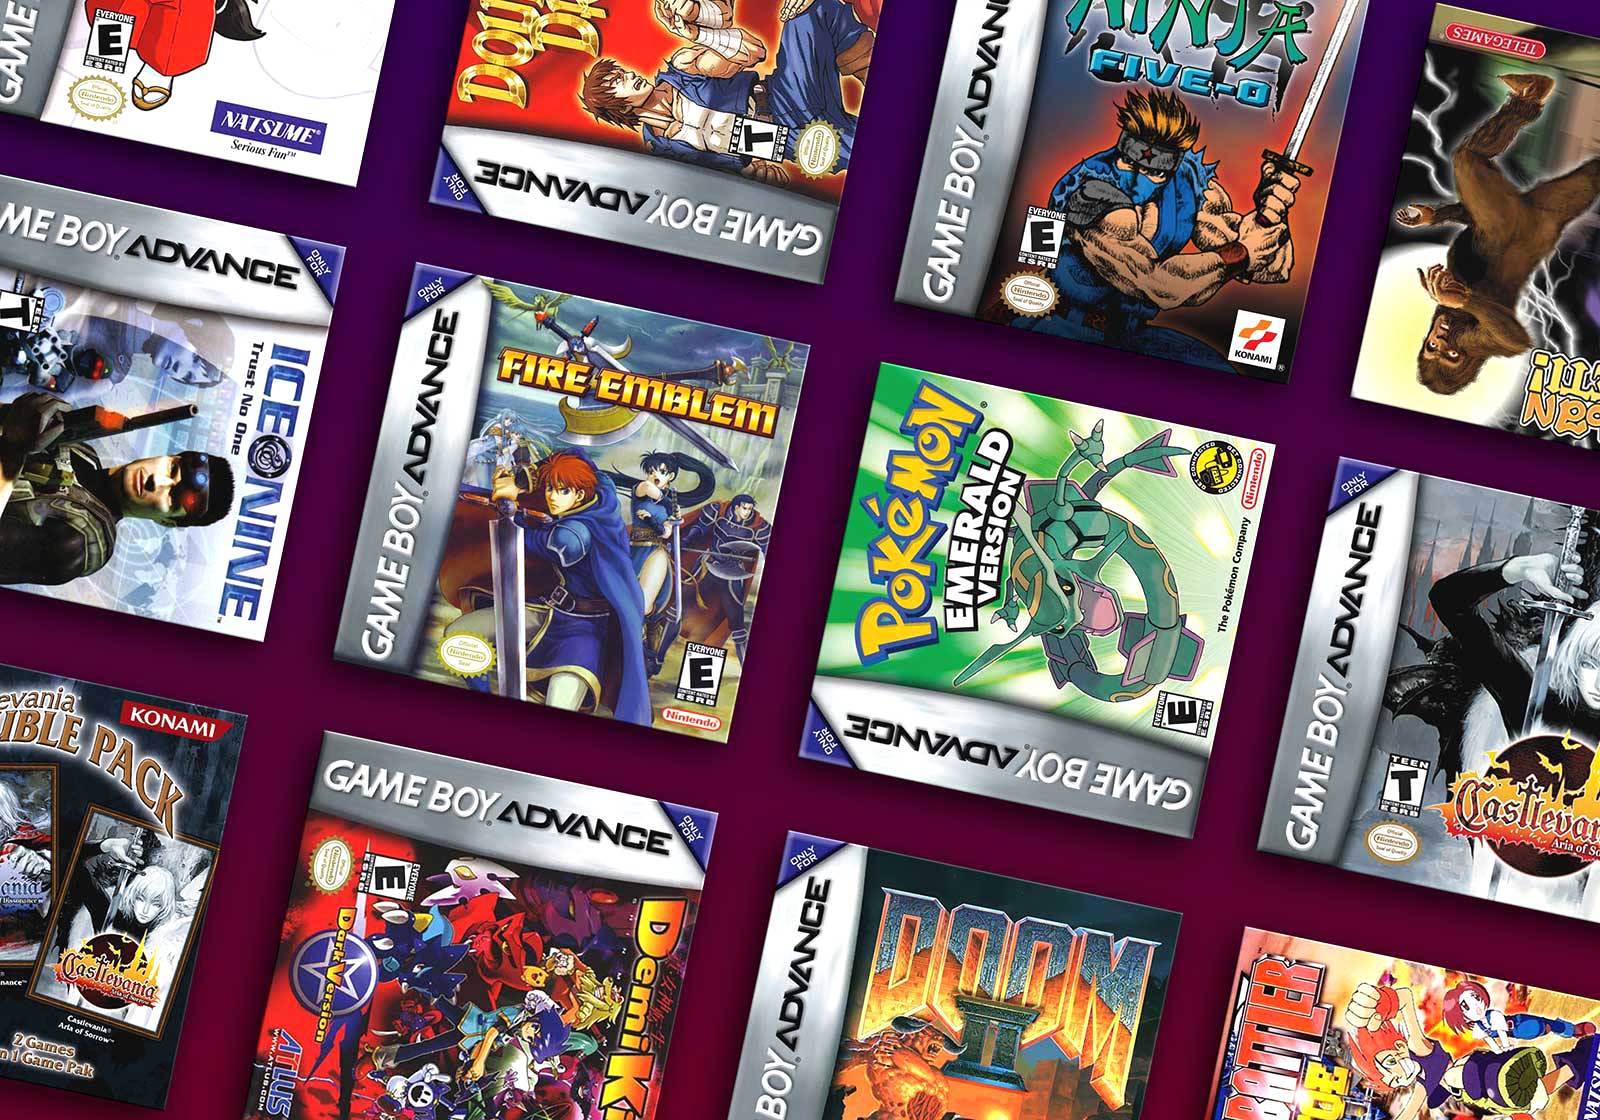 where to buy gameboy advance games